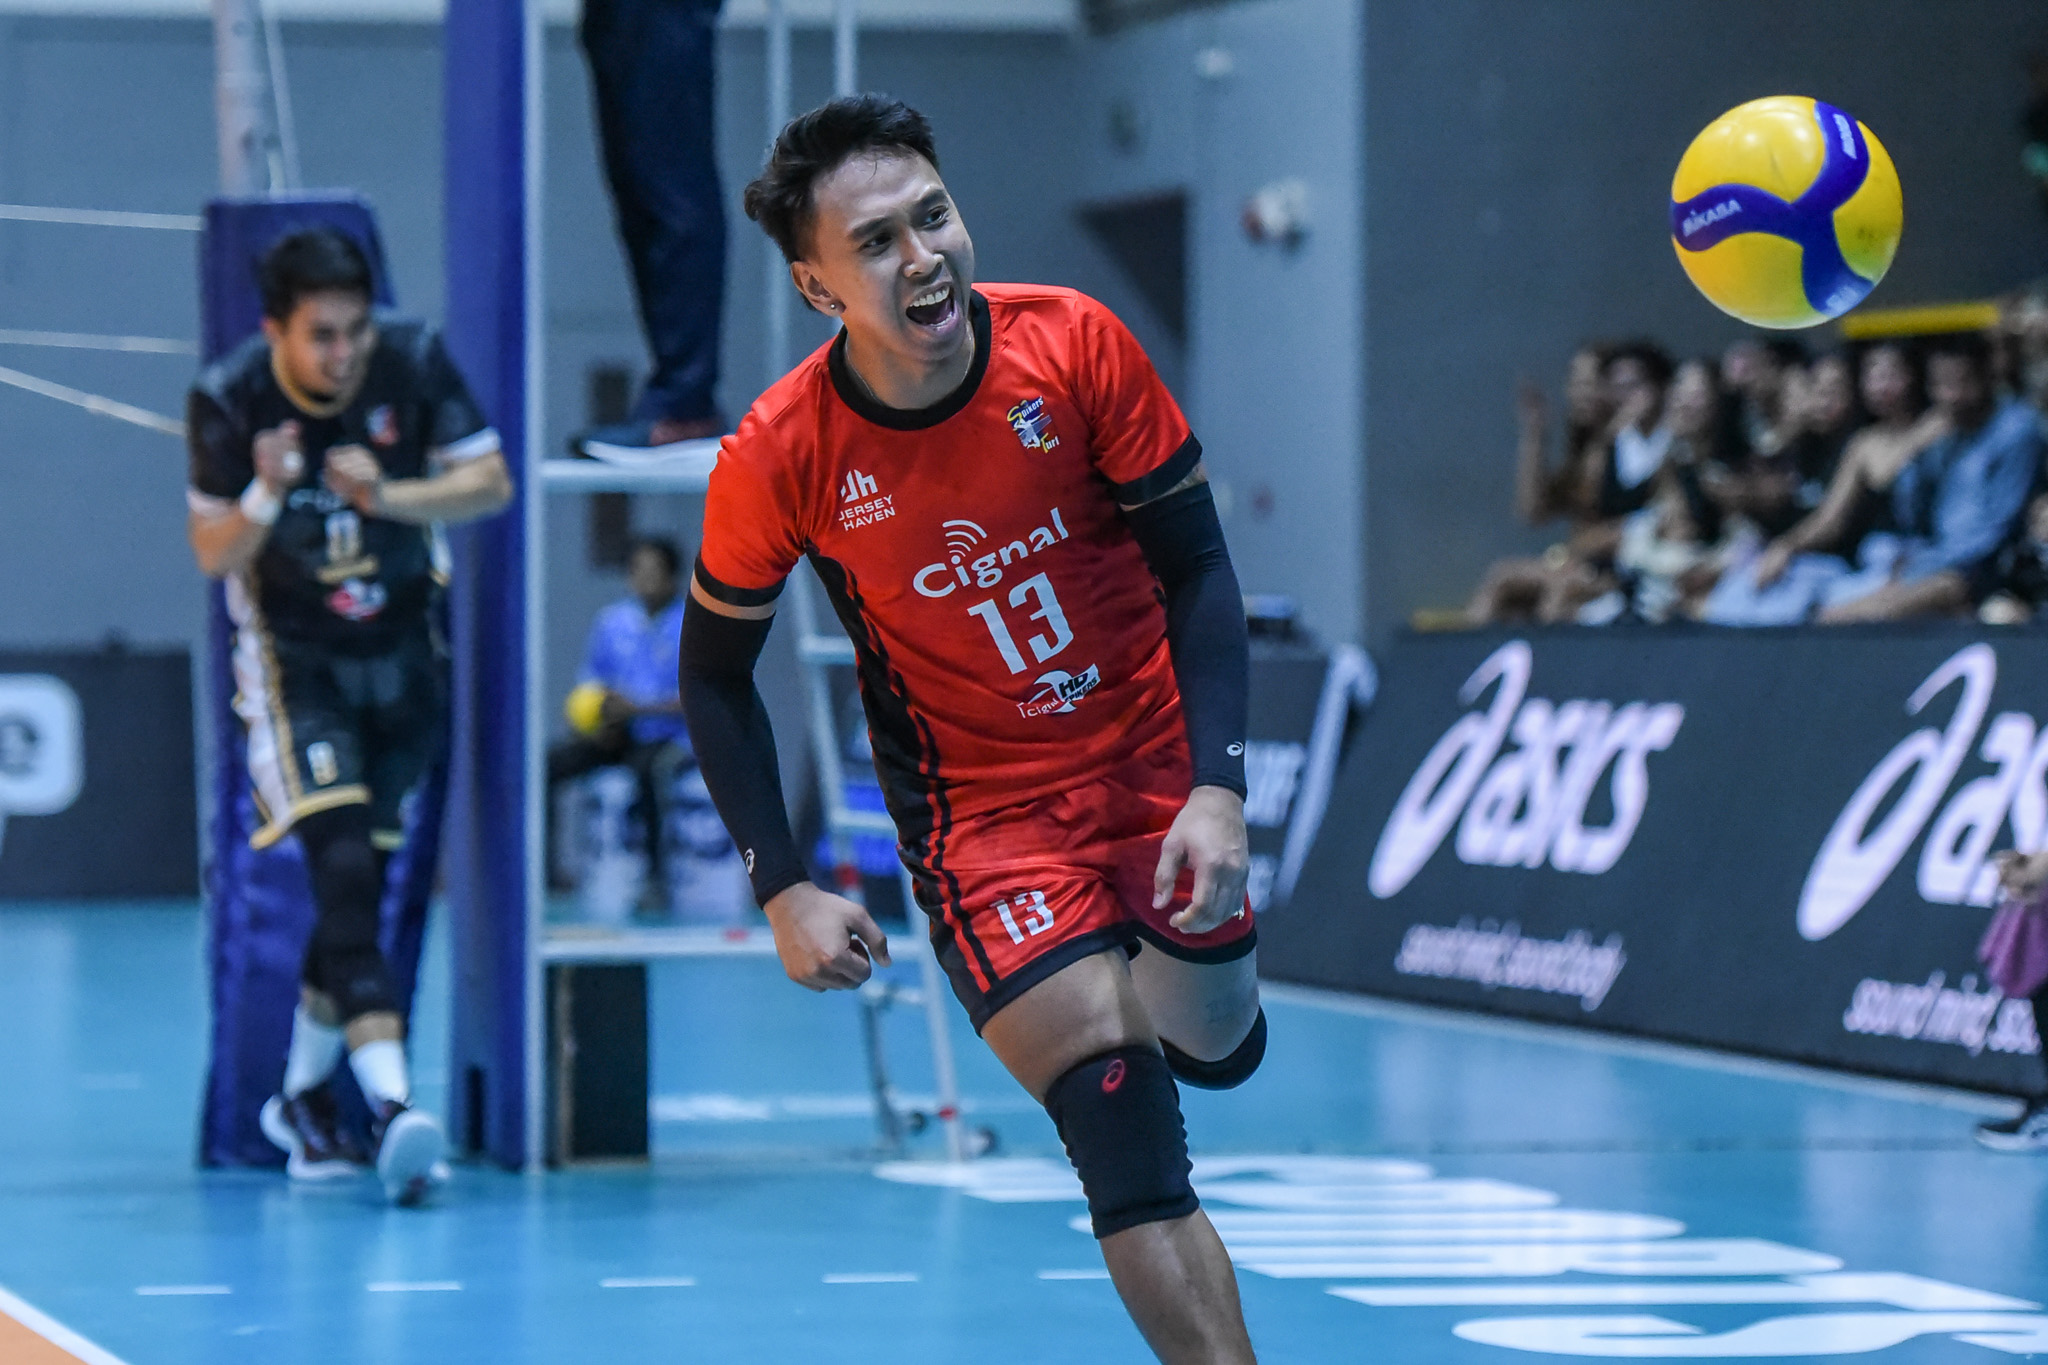 ST-2023-Cignal-vs.-Iloilo-Manuel-Sumanguid-1294 Bugaoan, Sumanguid grateful to Espejo for recommending them to KVL tryouts News Spikers' Turf Volleyball  - philippine sports news